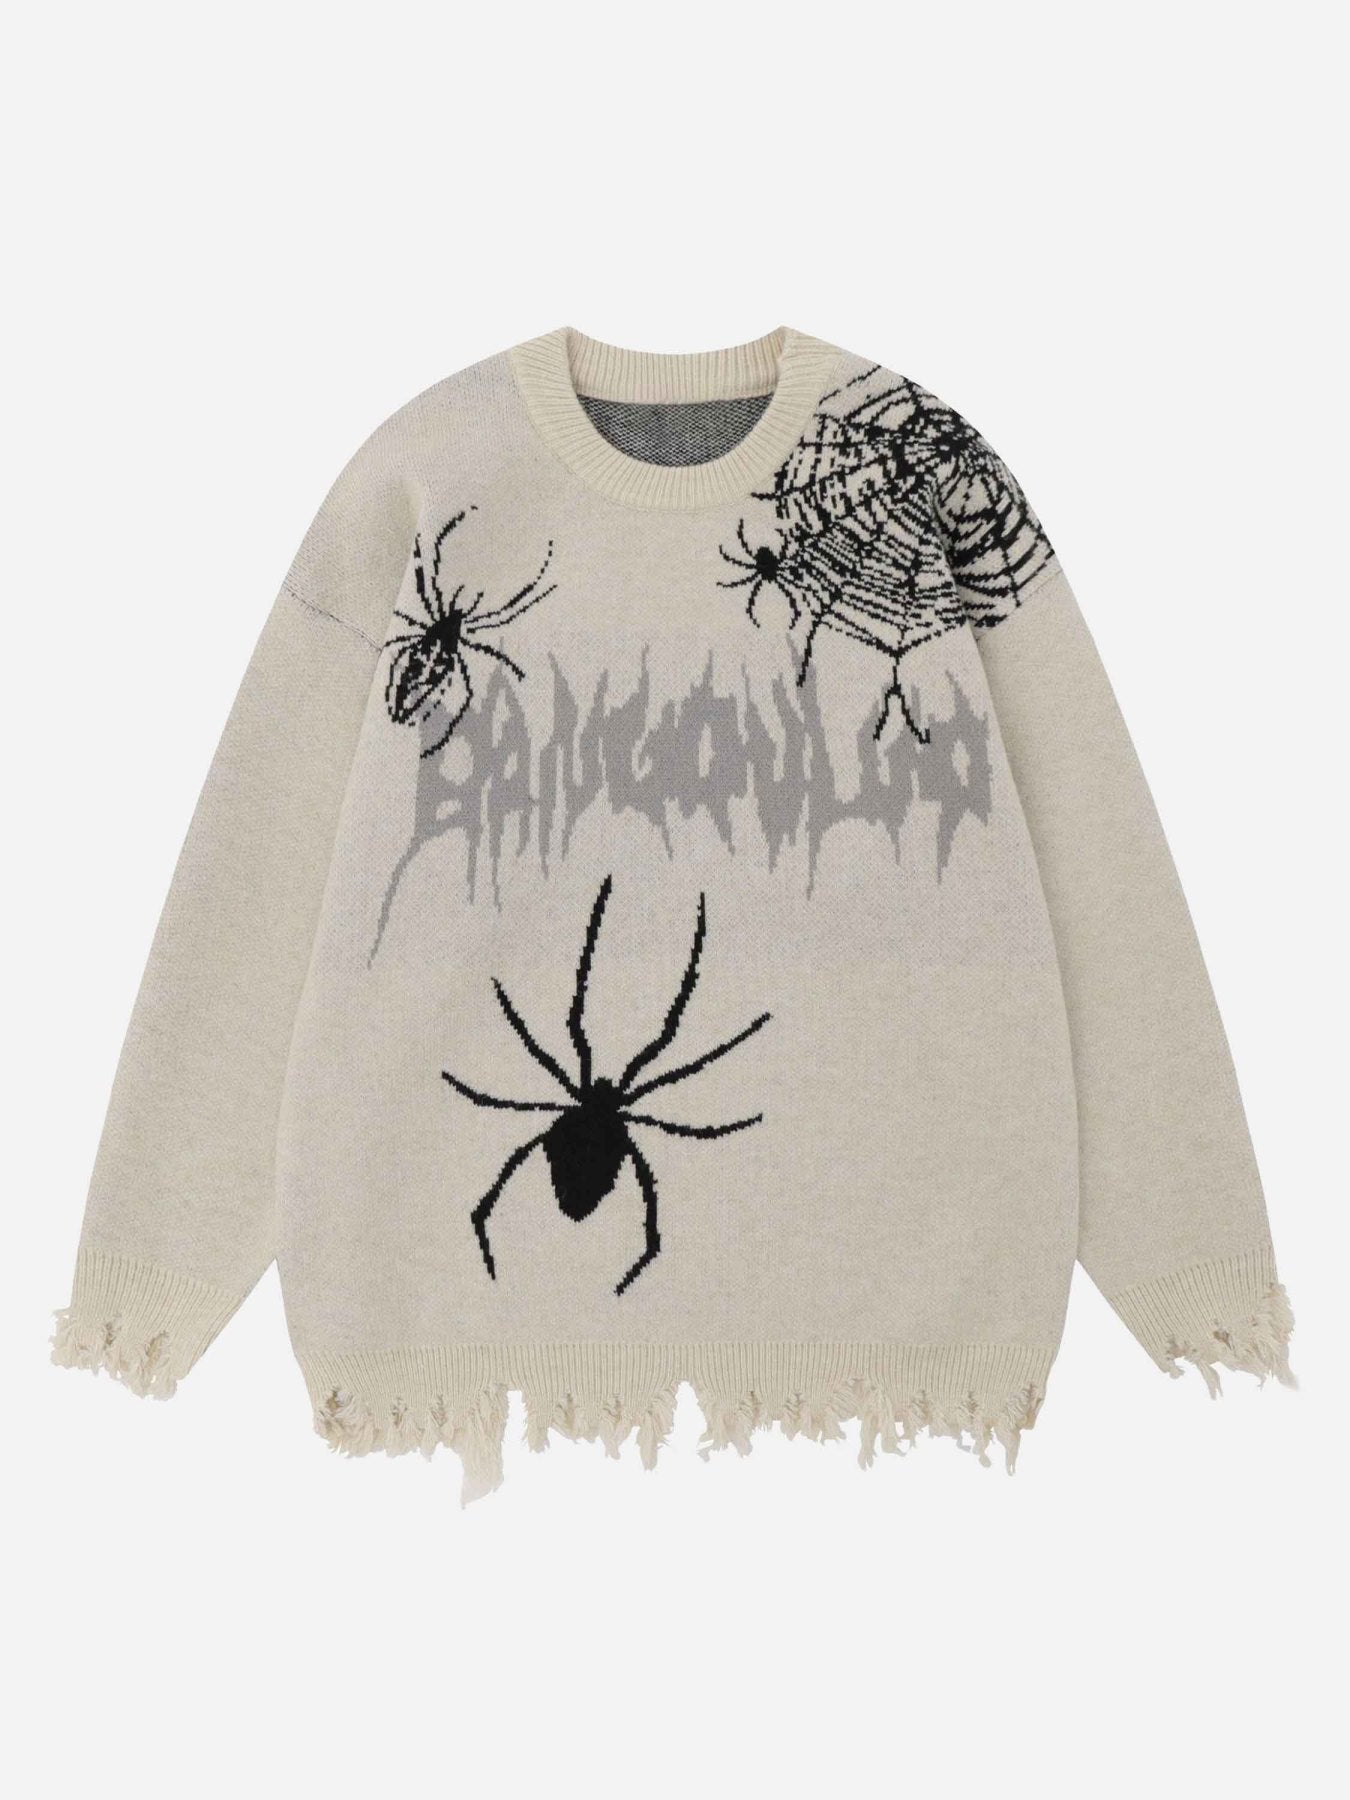 Thesupermade High Street Spider Web Jacquard Sweater